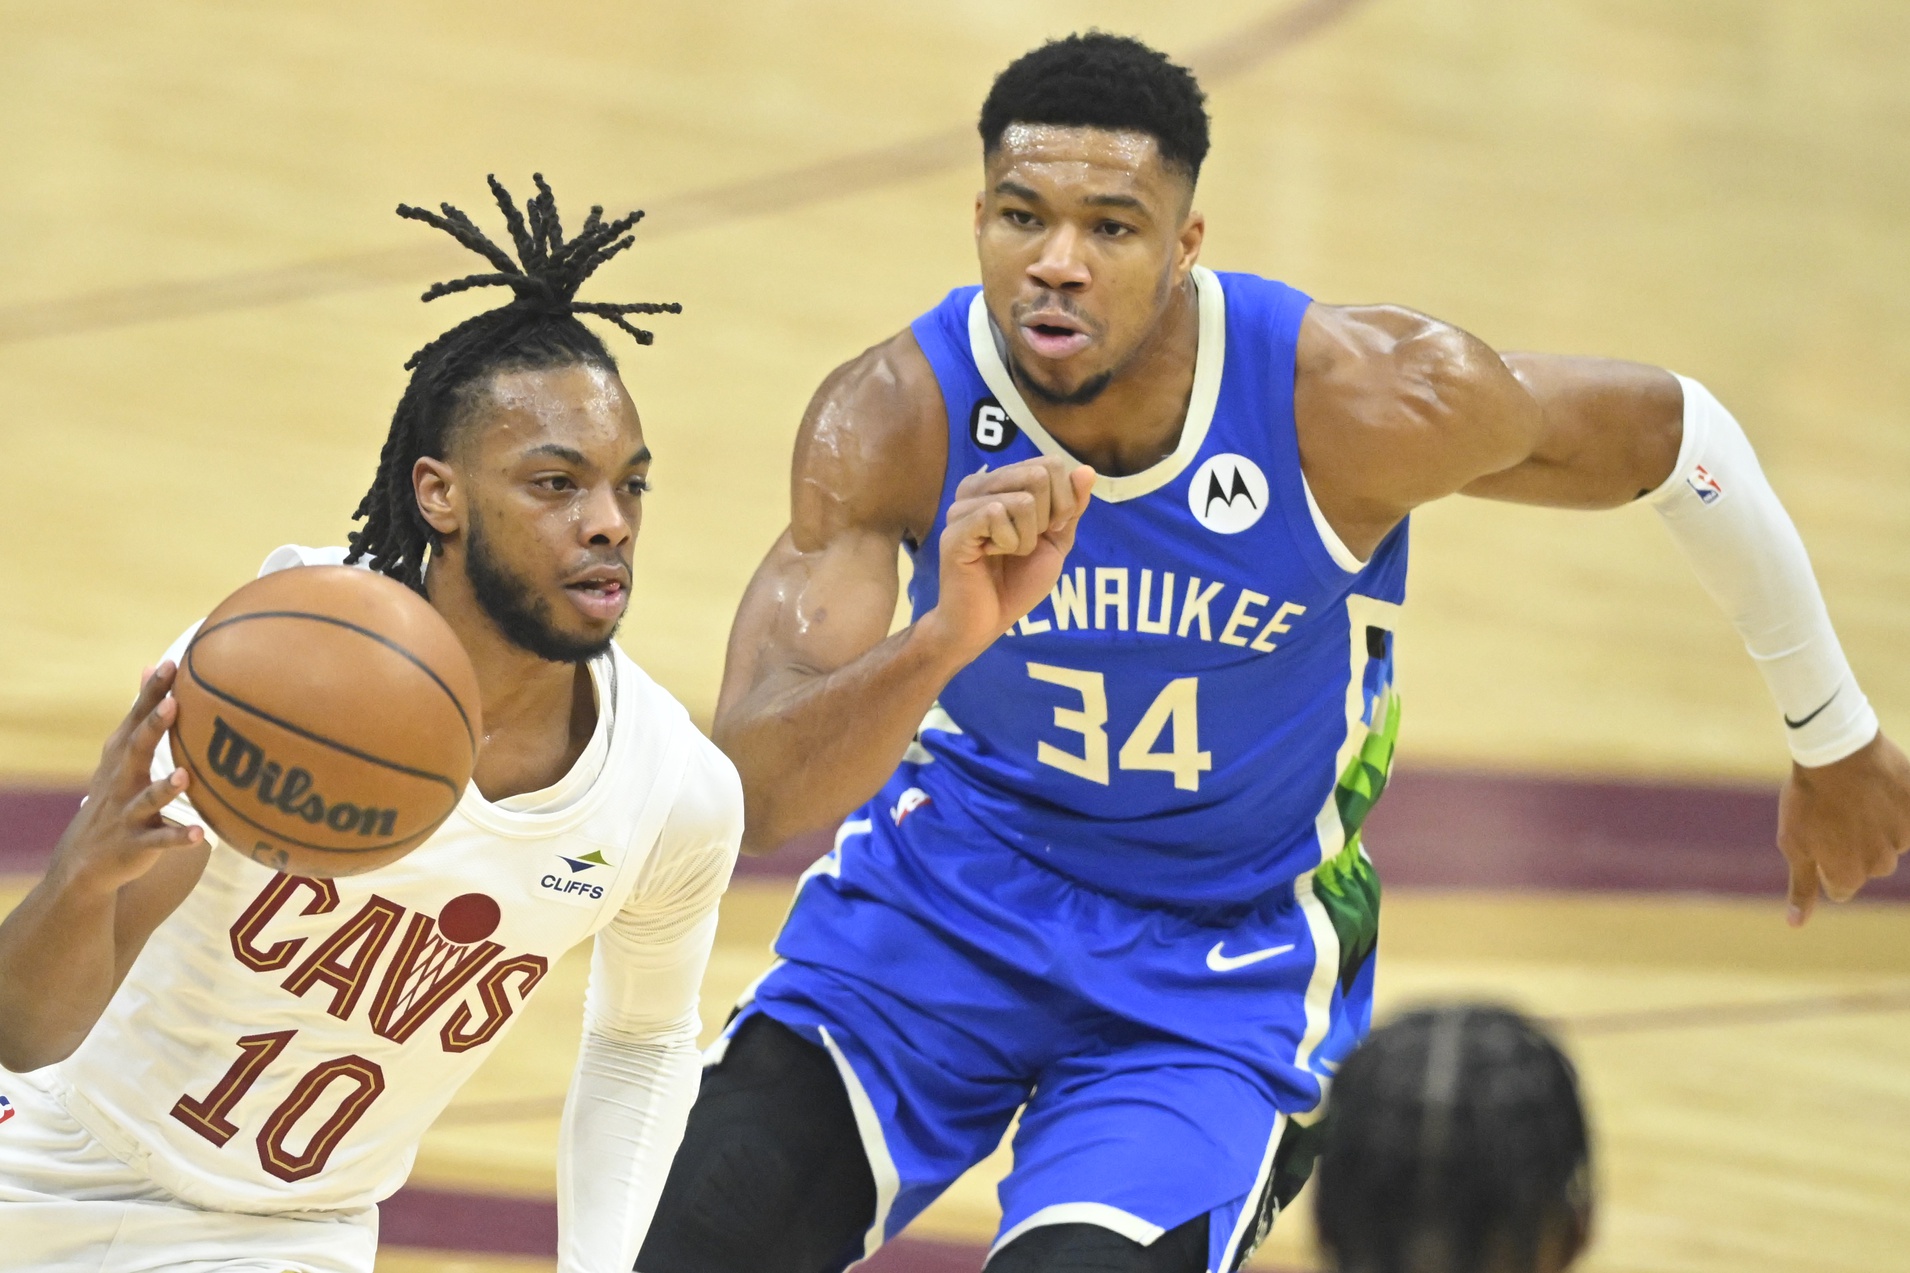 Dec 21, 2022; Cleveland, Ohio, USA; Cleveland Cavaliers guard Darius Garland (10) dribbles beside Milwaukee Bucks forward Giannis Antetokounmpo (34) in the first quarter at Rocket Mortgage FieldHouse. Mandatory Credit: David Richard-USA TODAY Sports